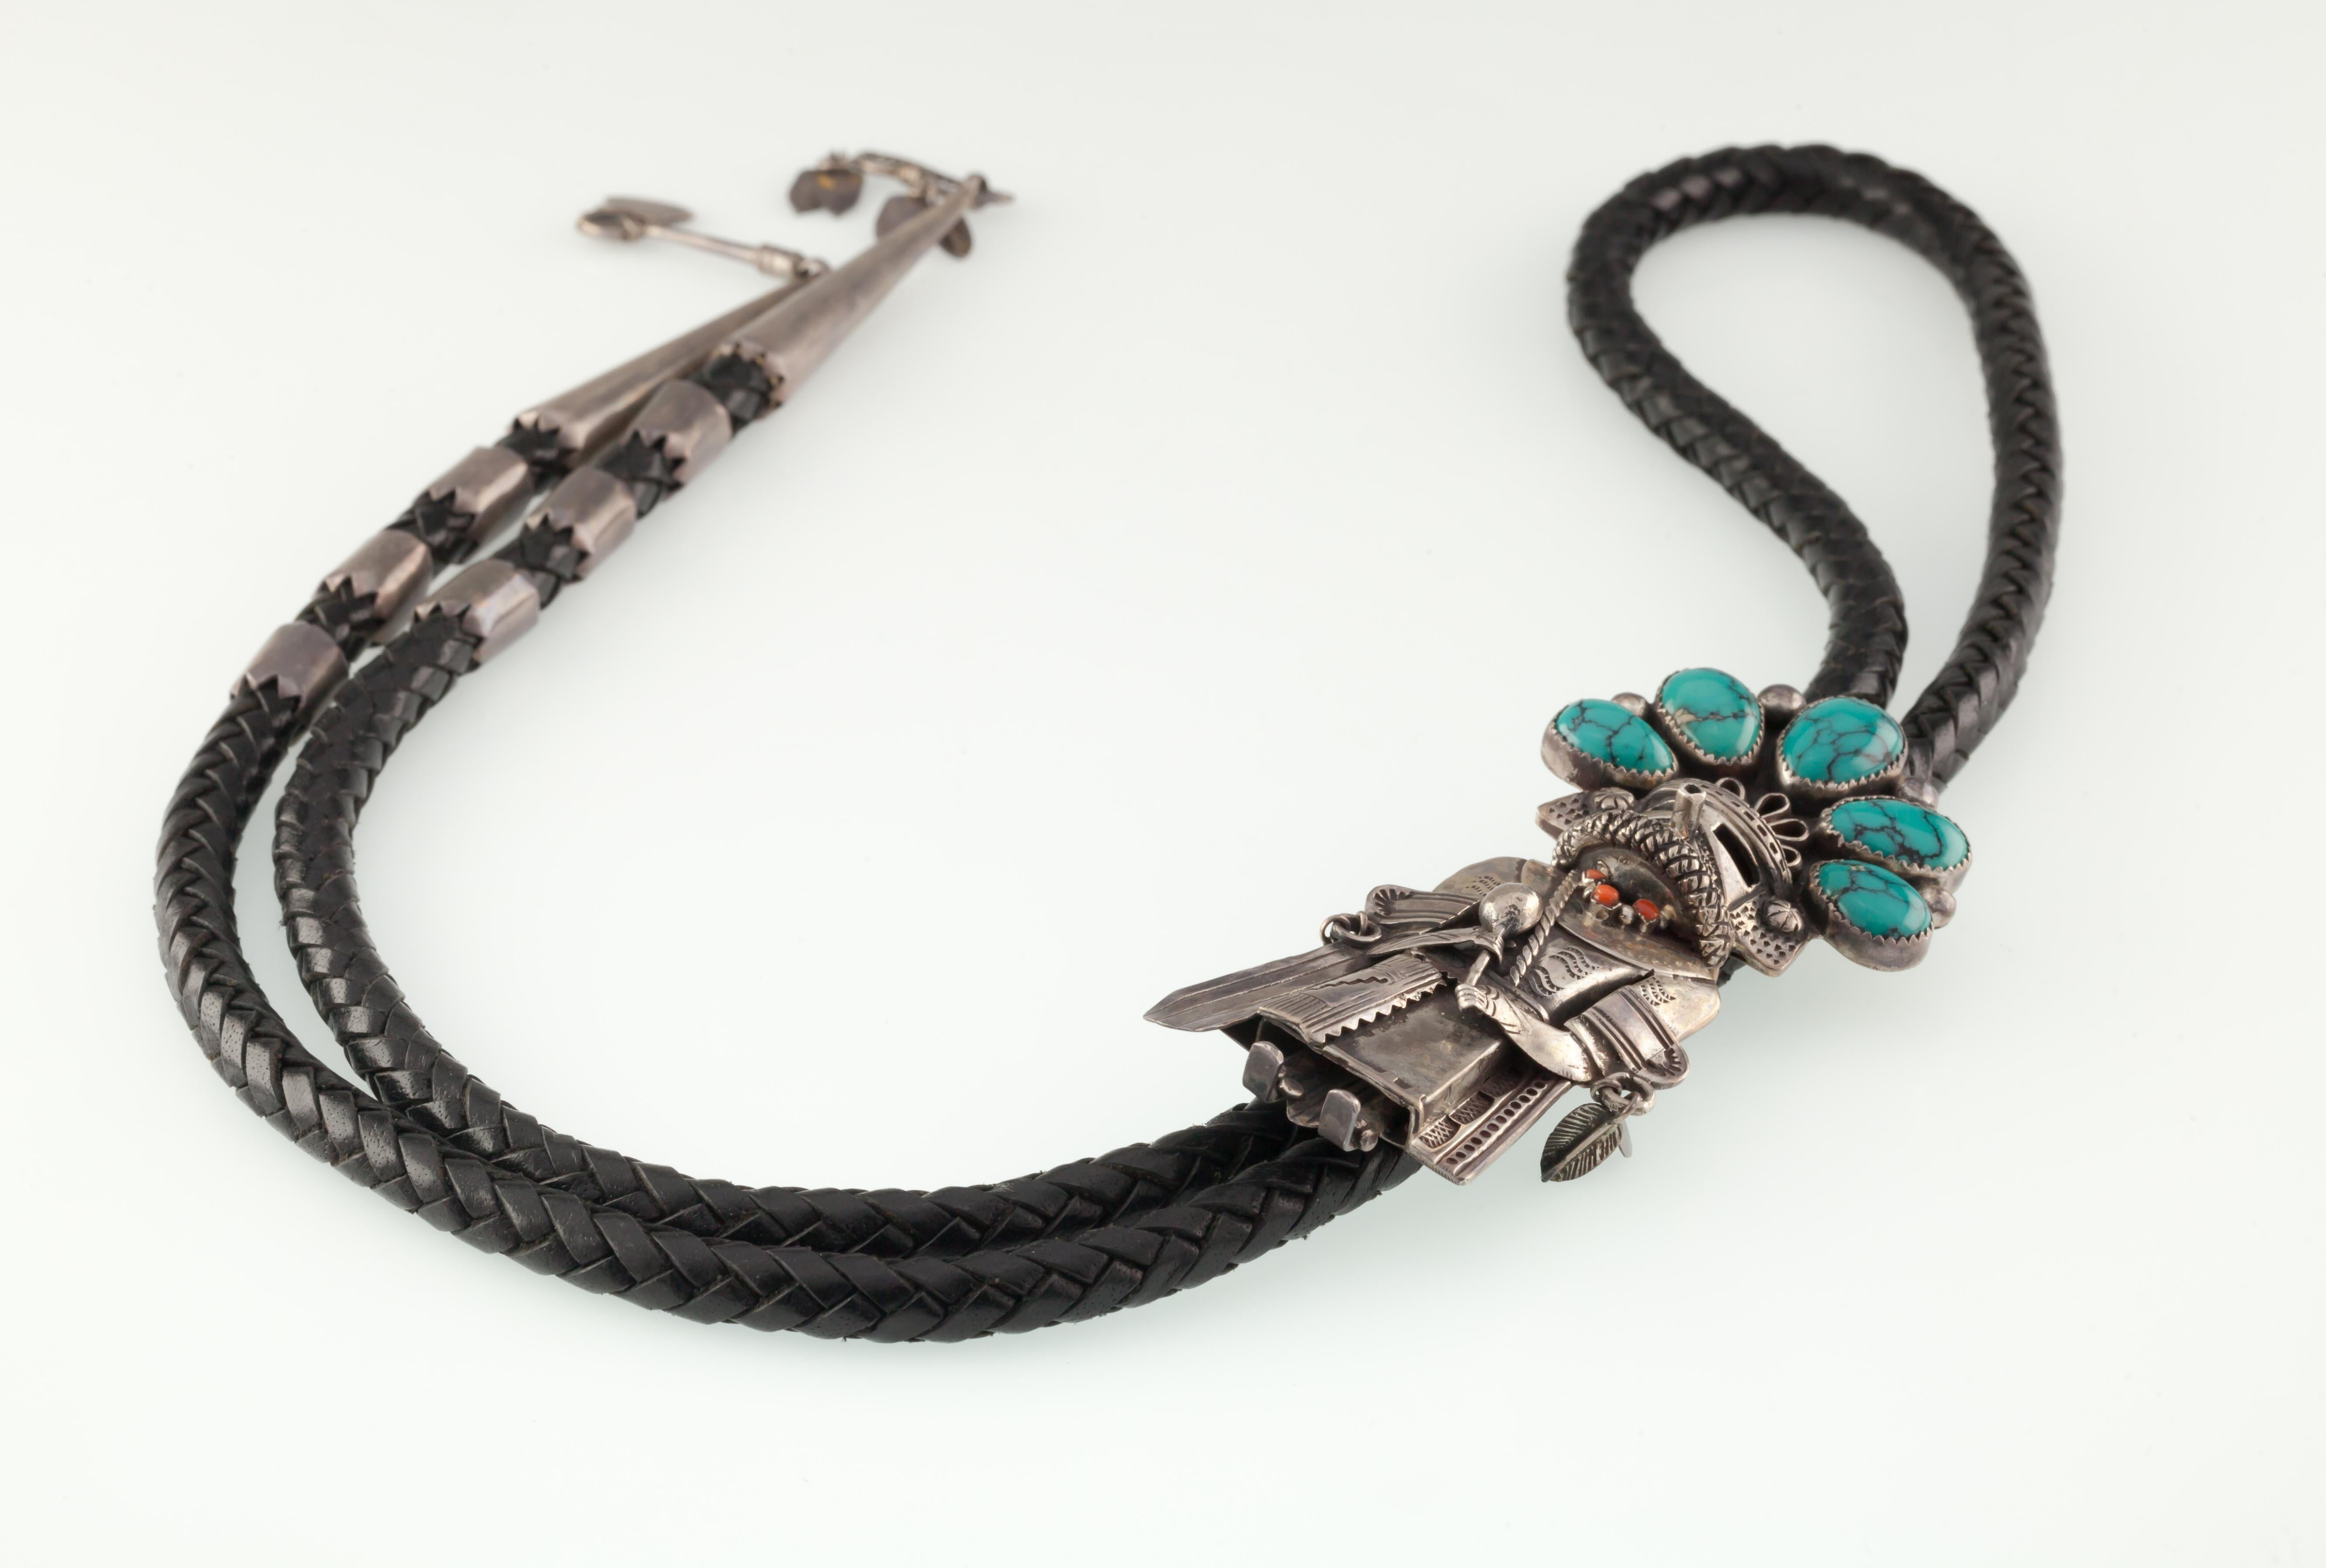 Women's or Men's Navajo Handcrafted Sterling Silver & Turquoise Kachina Black Leather Bolo Tie